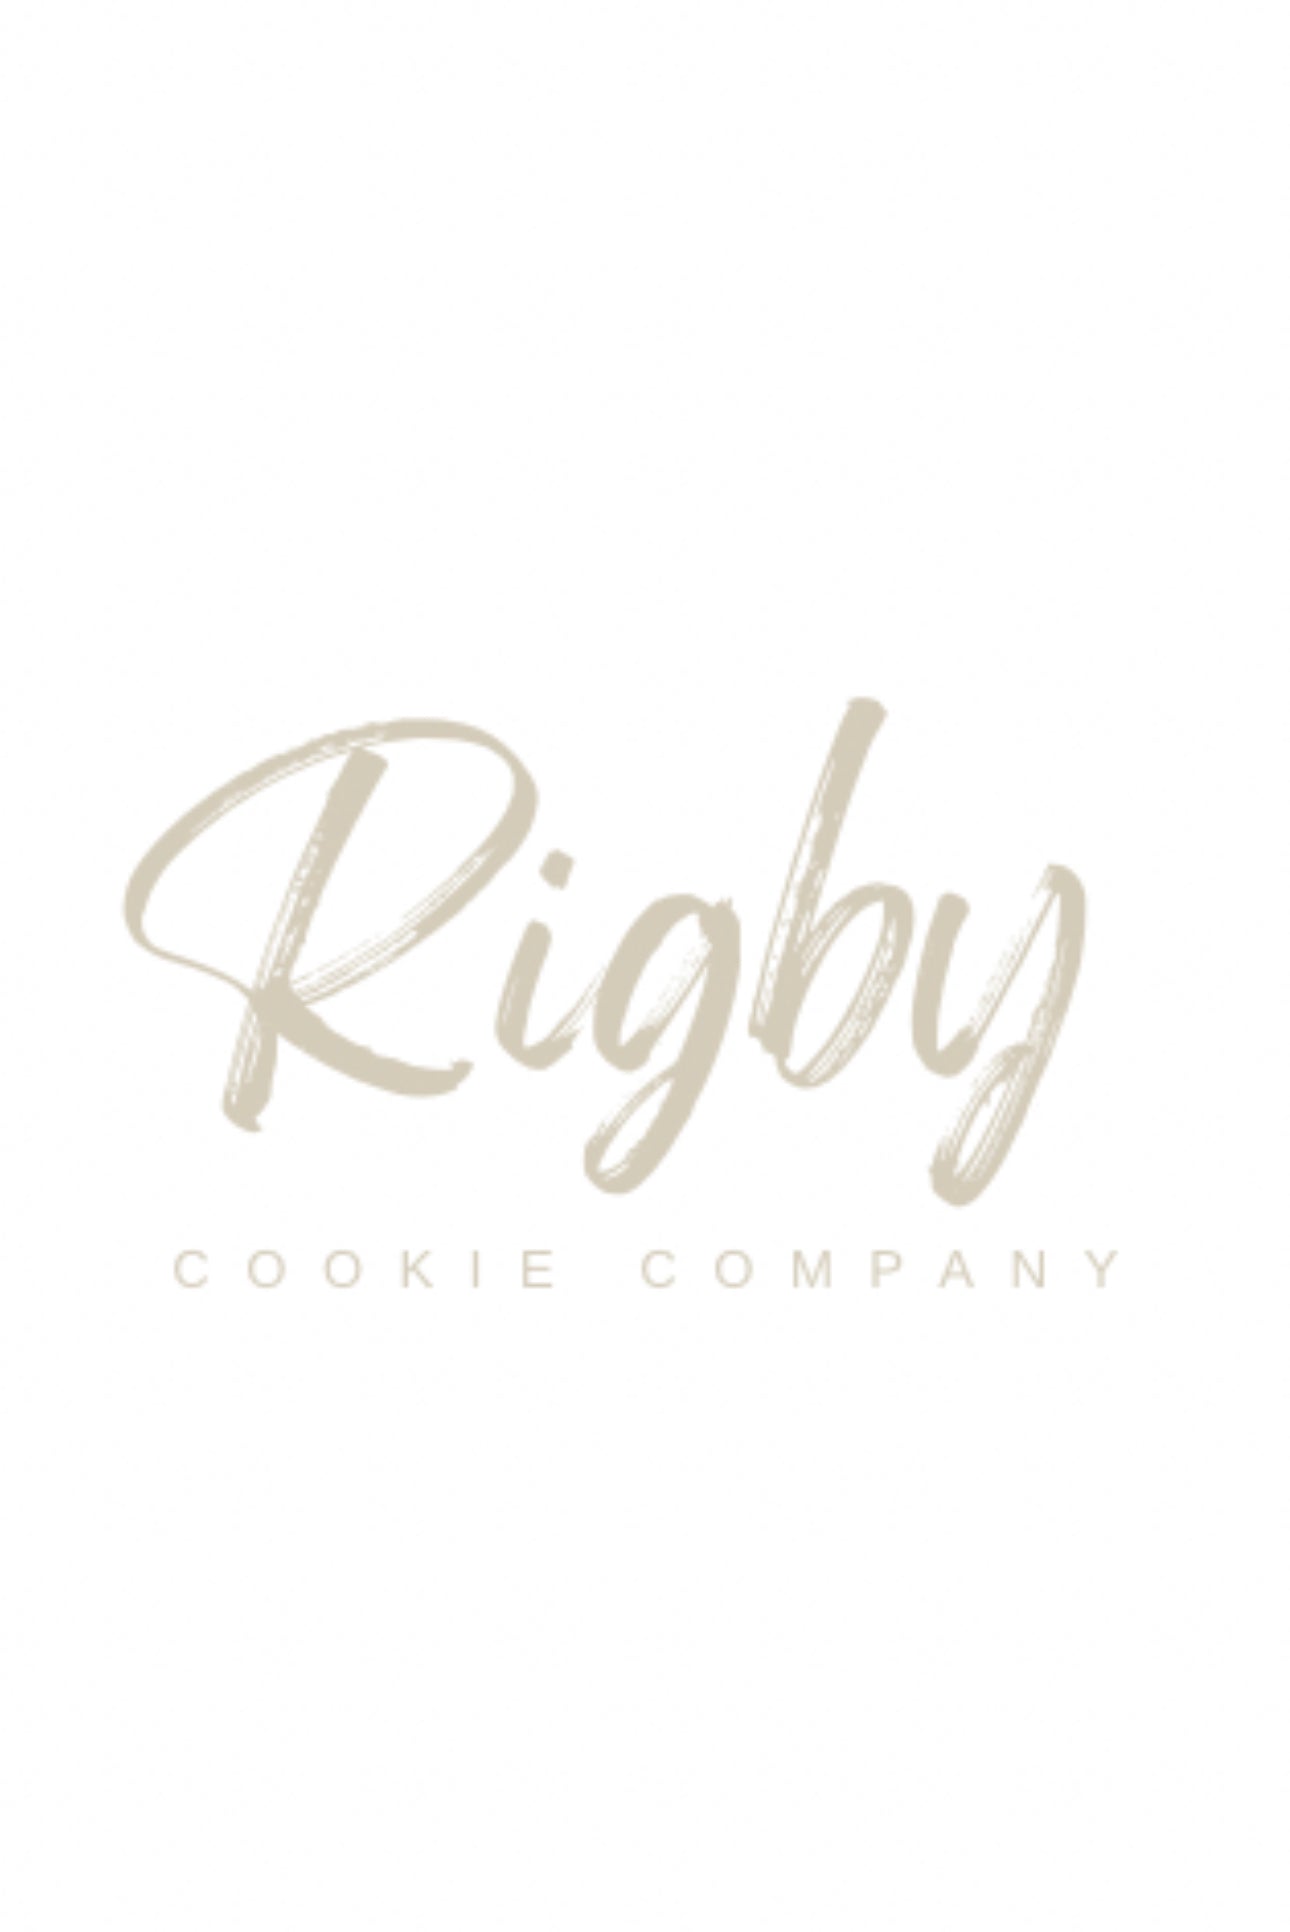 Rigby Cookie Co.